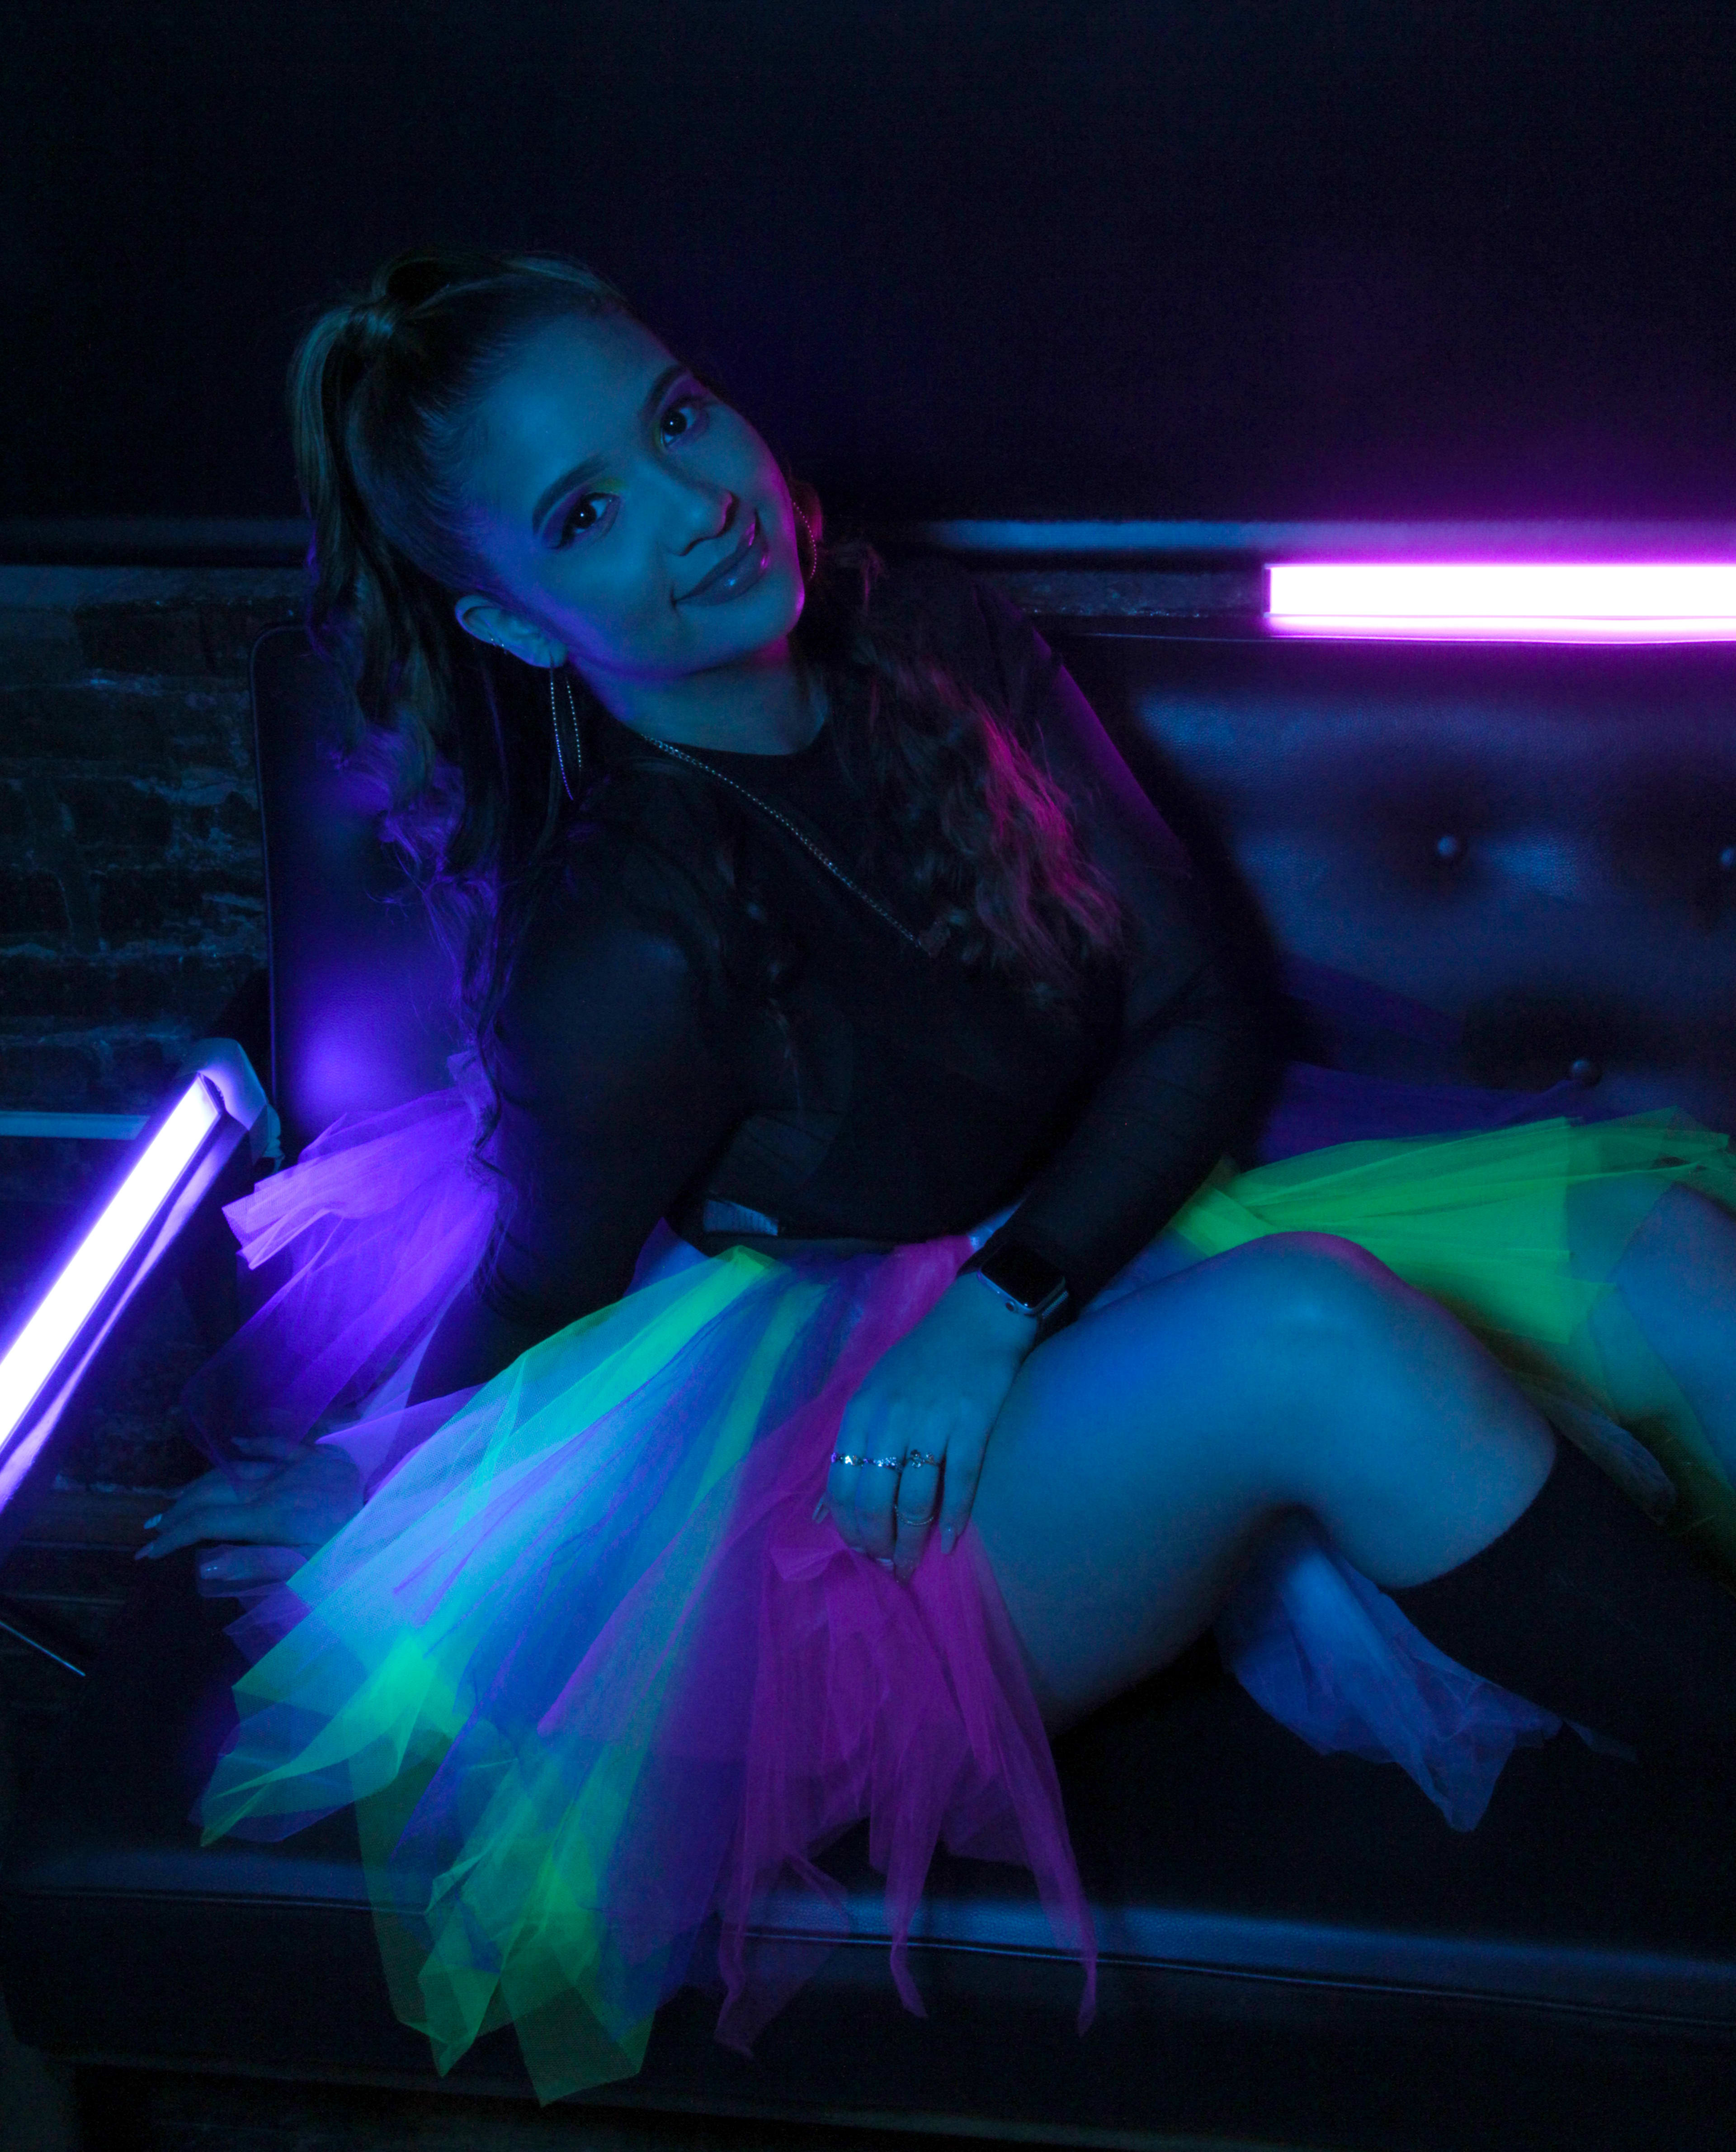 A woman posing for a photoshoot on a neon-lit couch in an 1980s inspired fashion setting.